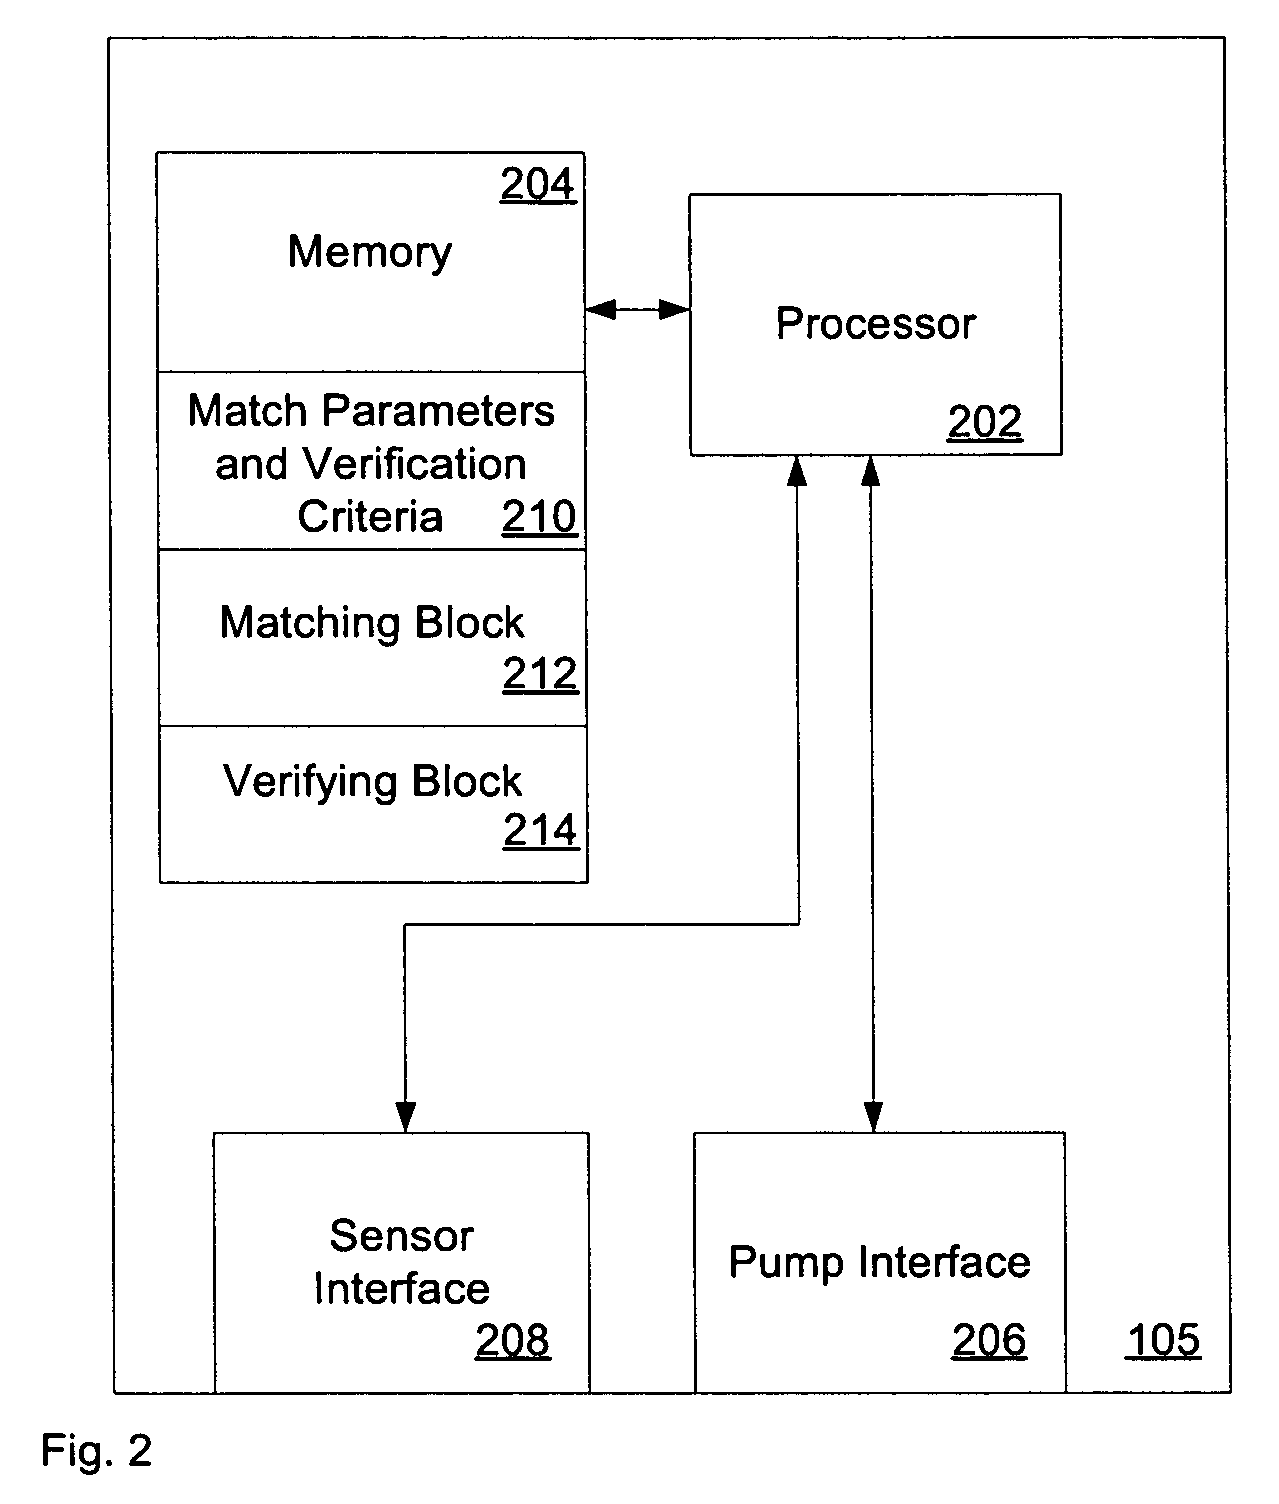 Determining connections of multiple energy sources and energy delivery devices